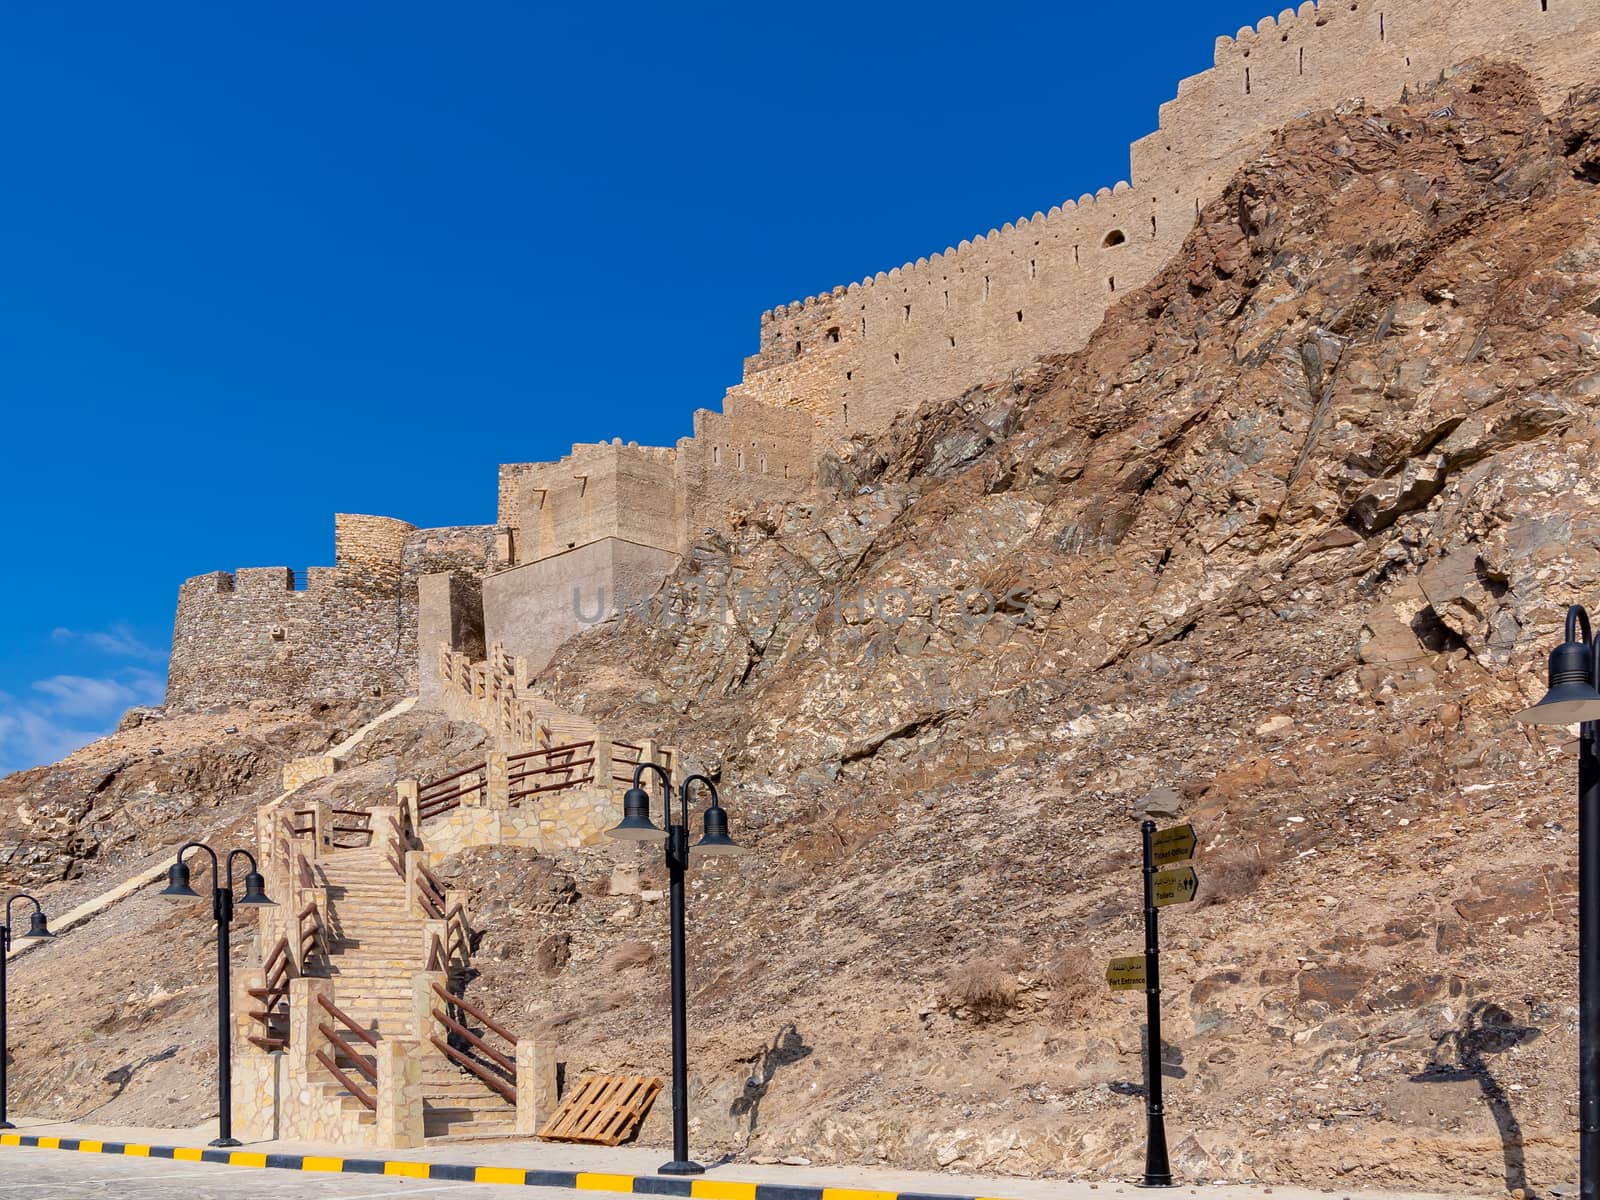 Fort Muttrah in Muscat, the capital of Oman.